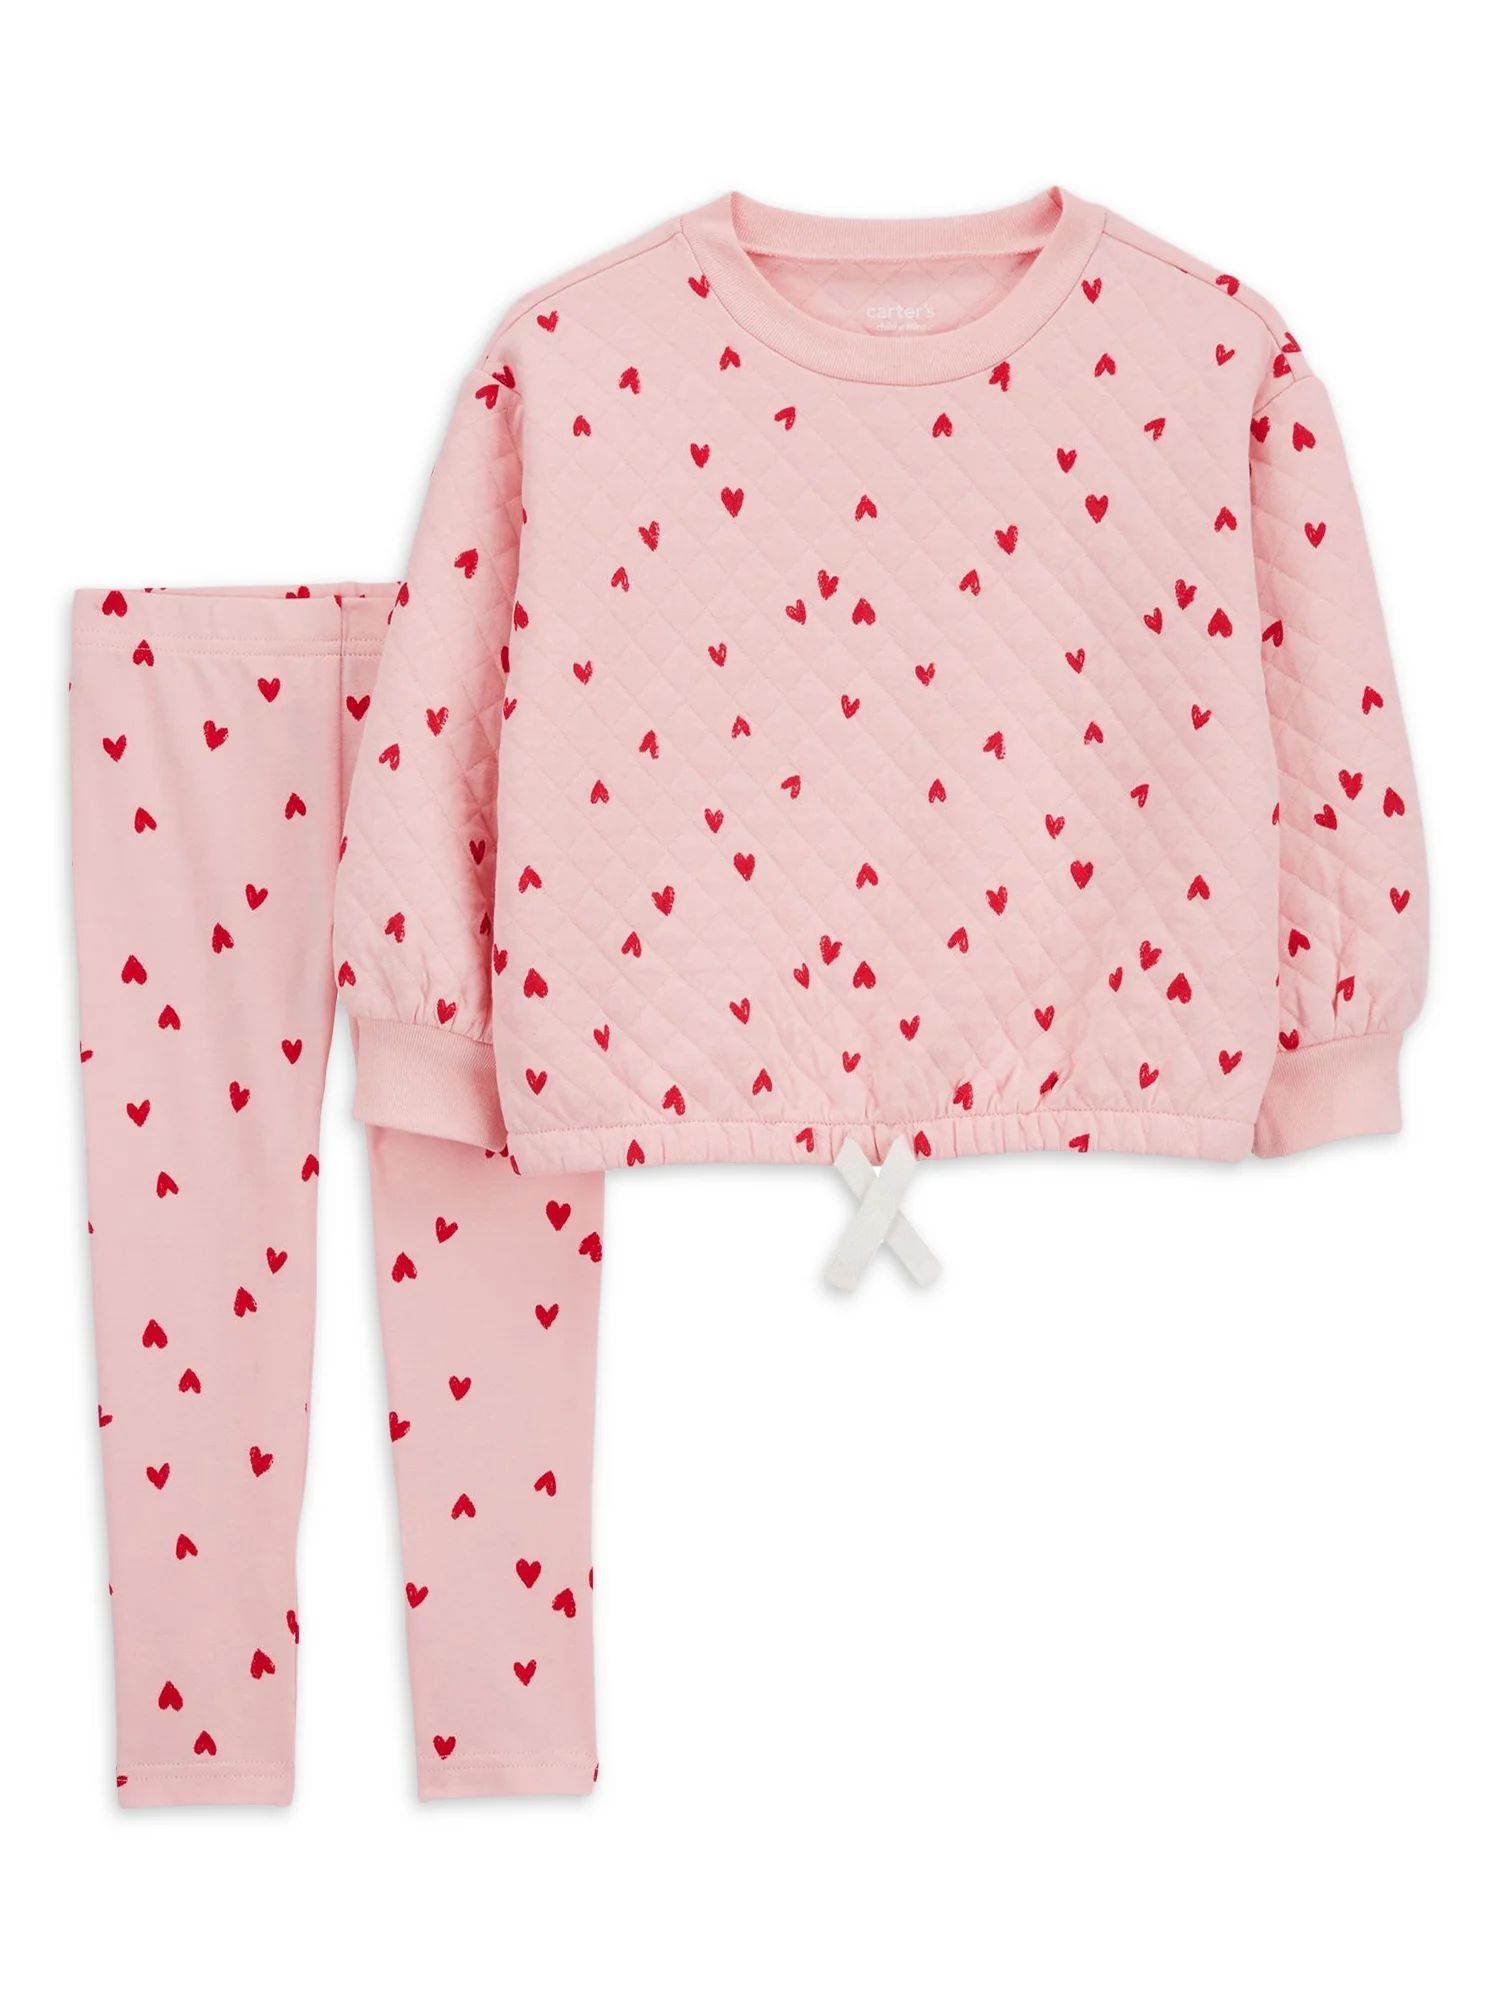 Carter's Child of Mine Baby and Toddler Girl Valentine's Day Outfit Set, 2-Piece, Sizes 12M-5T | Walmart (US)